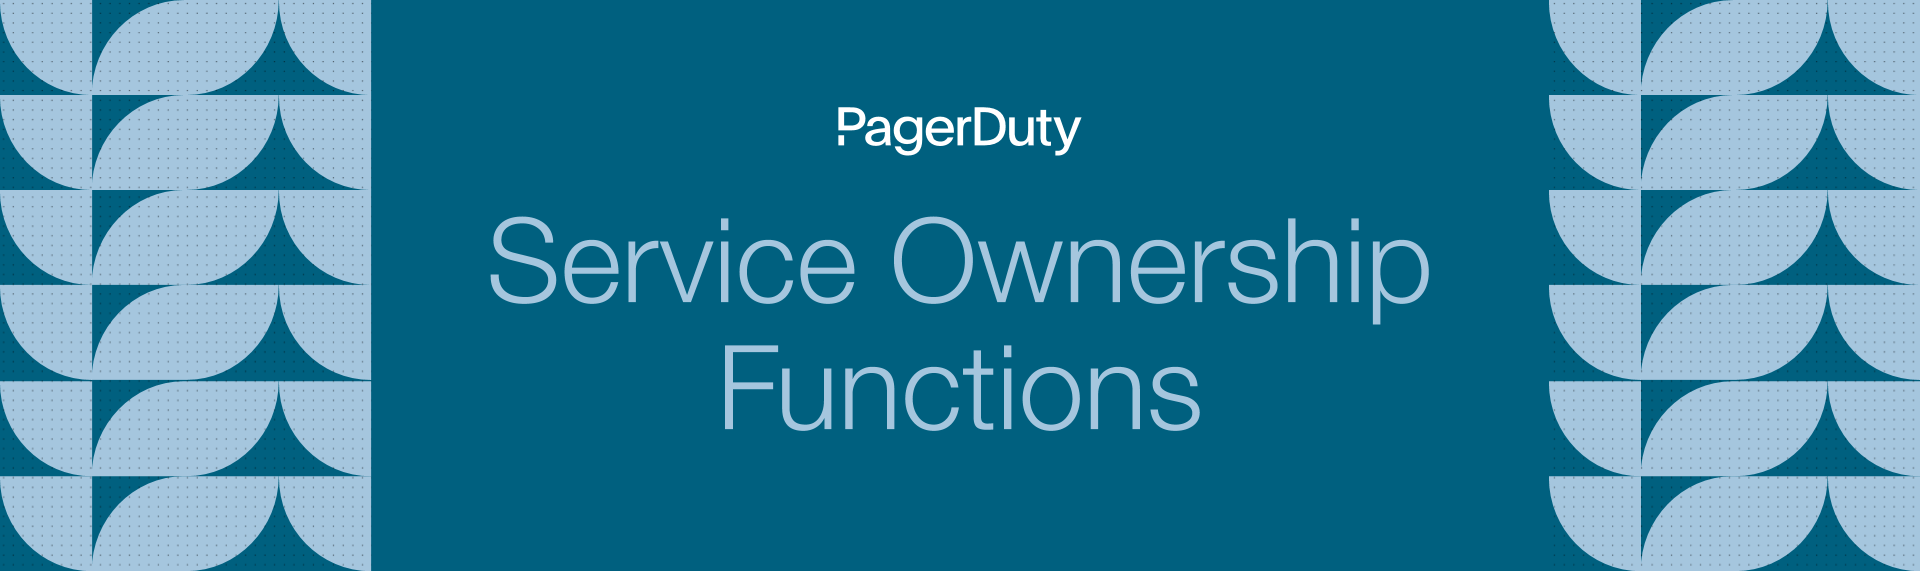 Service Ownership Functions